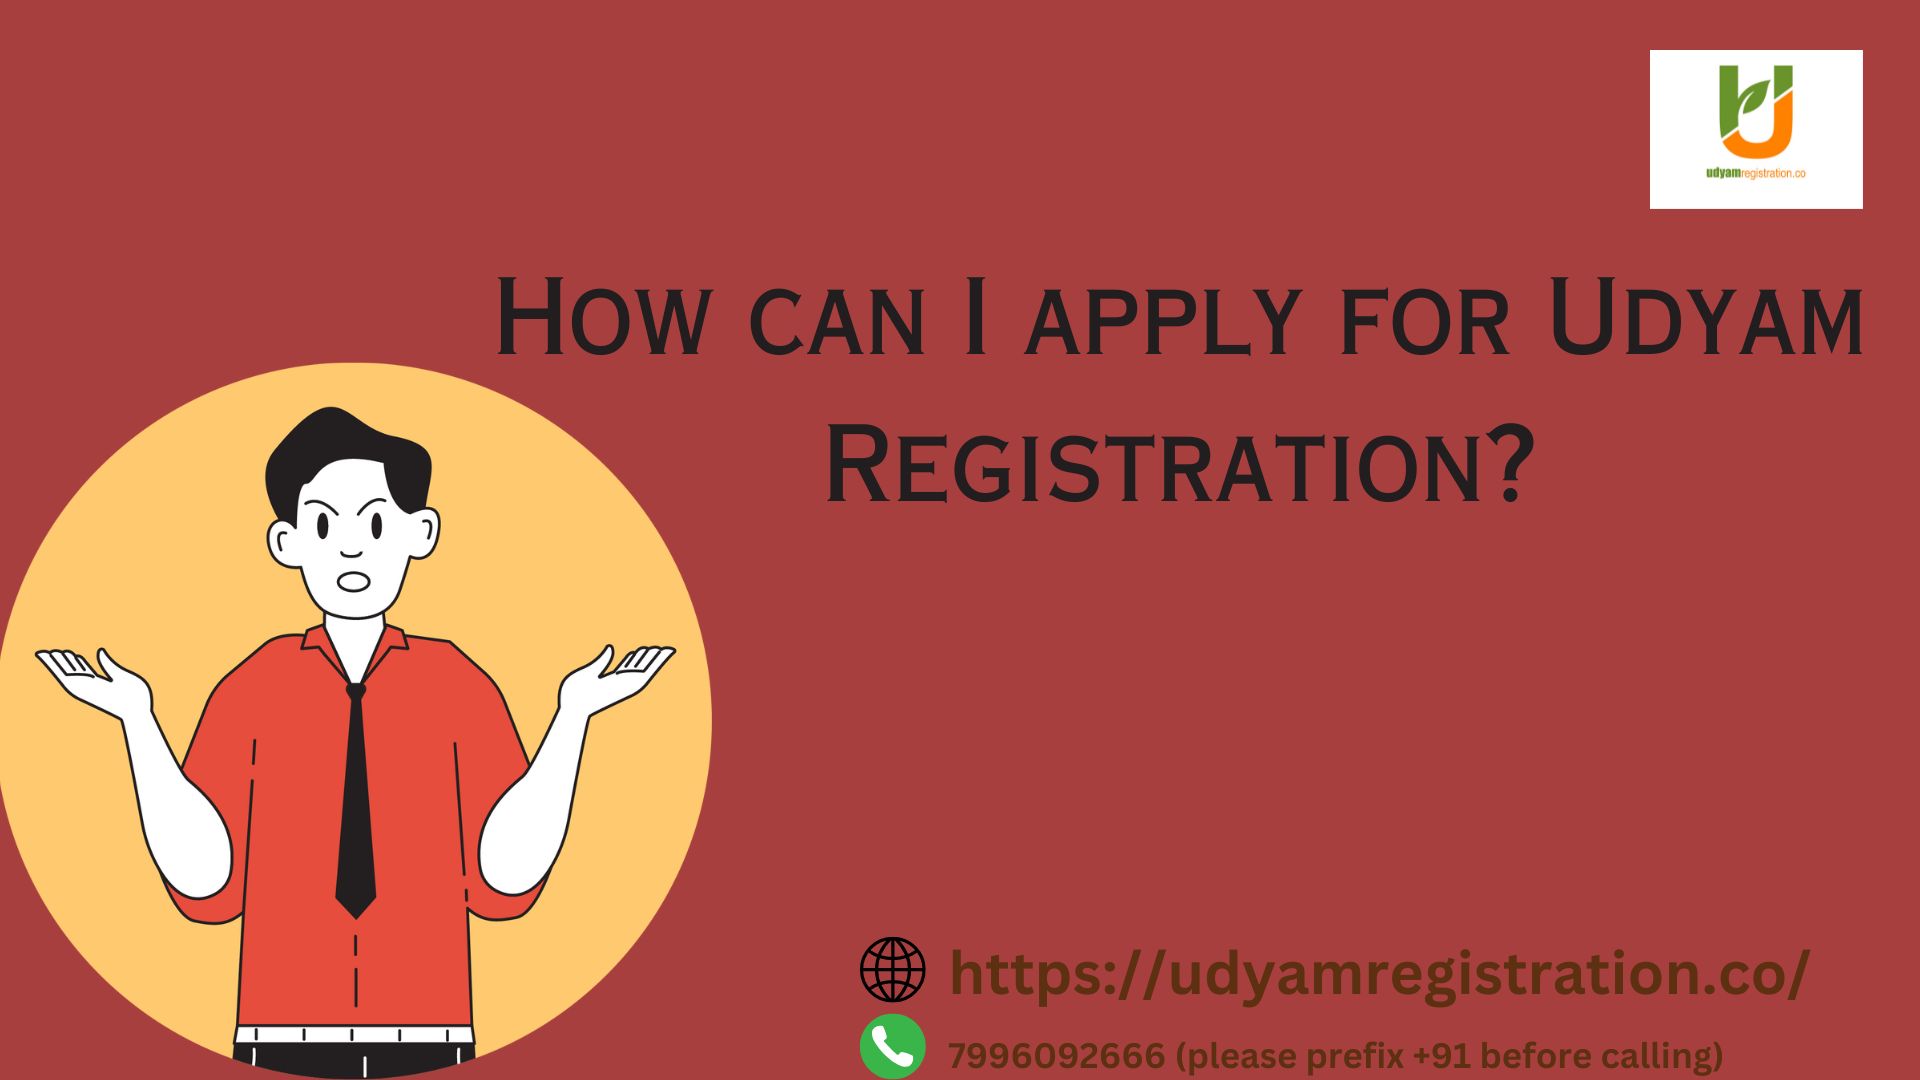 How can I apply for Udyam Registration